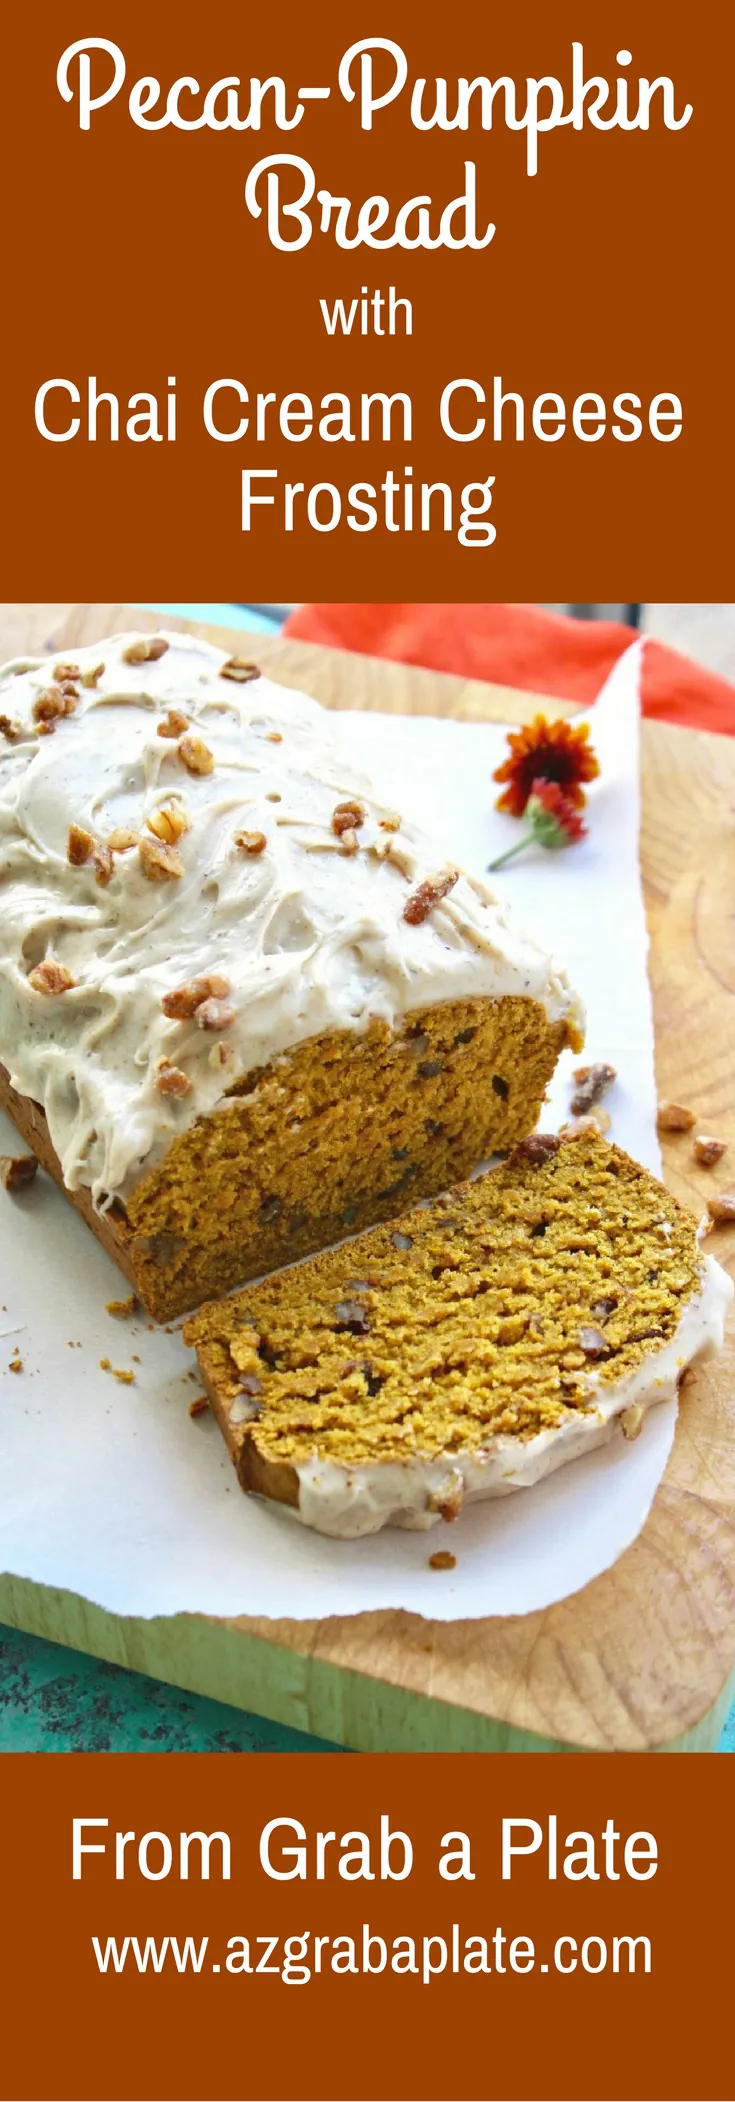 Pecan-Pumpkin Bread with Chai Cream Cheese Frosting is a delicious treat, perfect for the season!